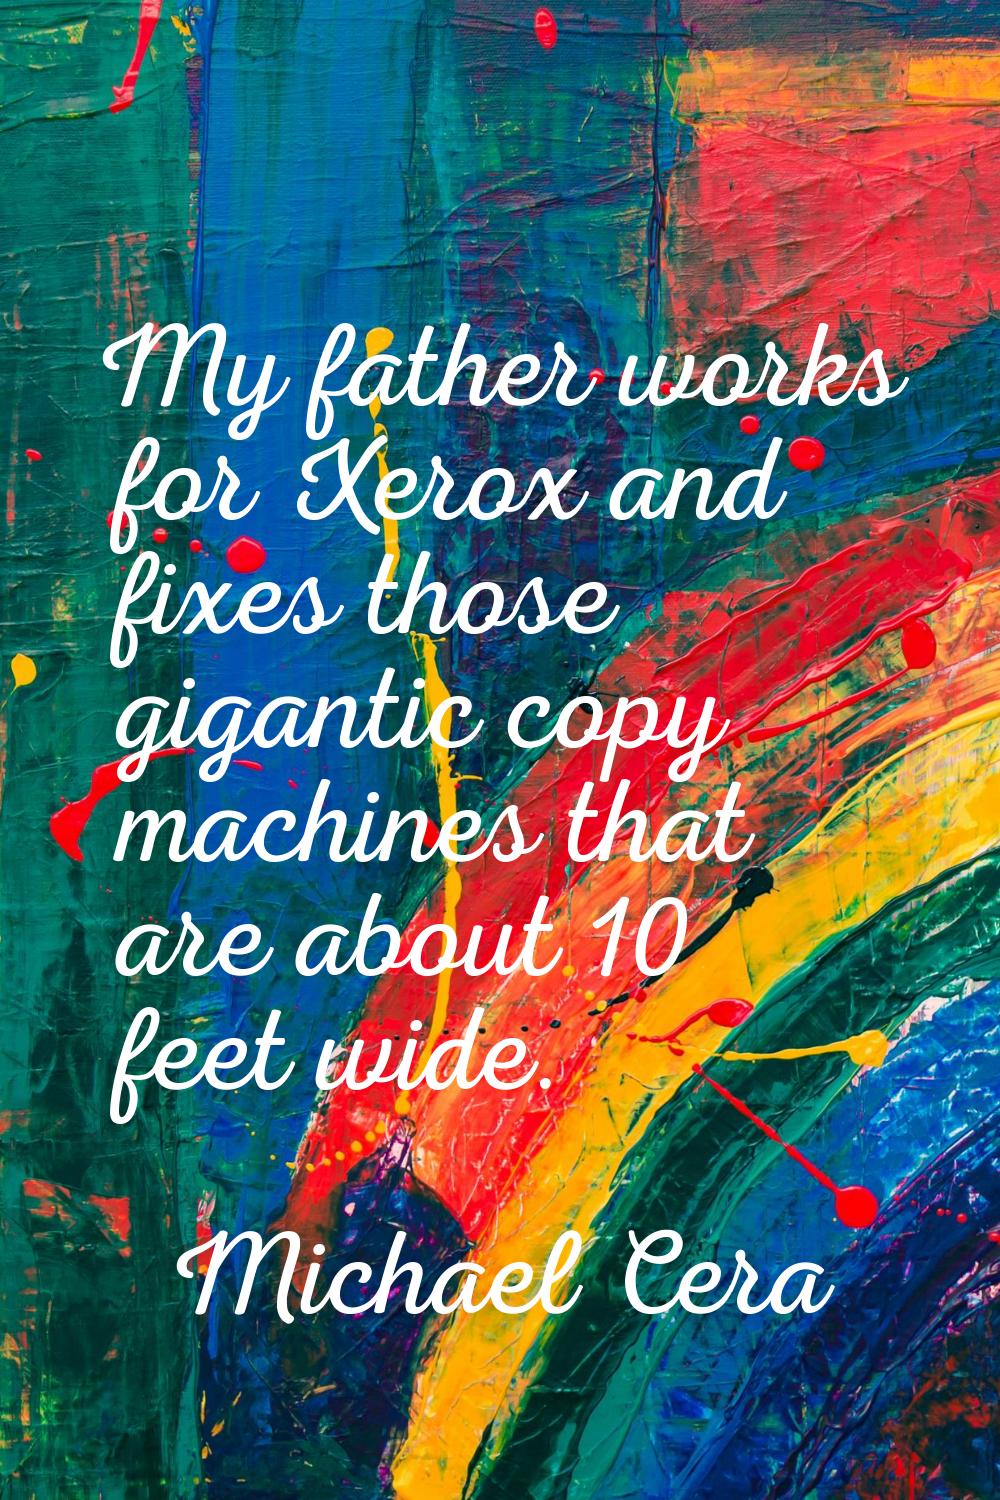 My father works for Xerox and fixes those gigantic copy machines that are about 10 feet wide.